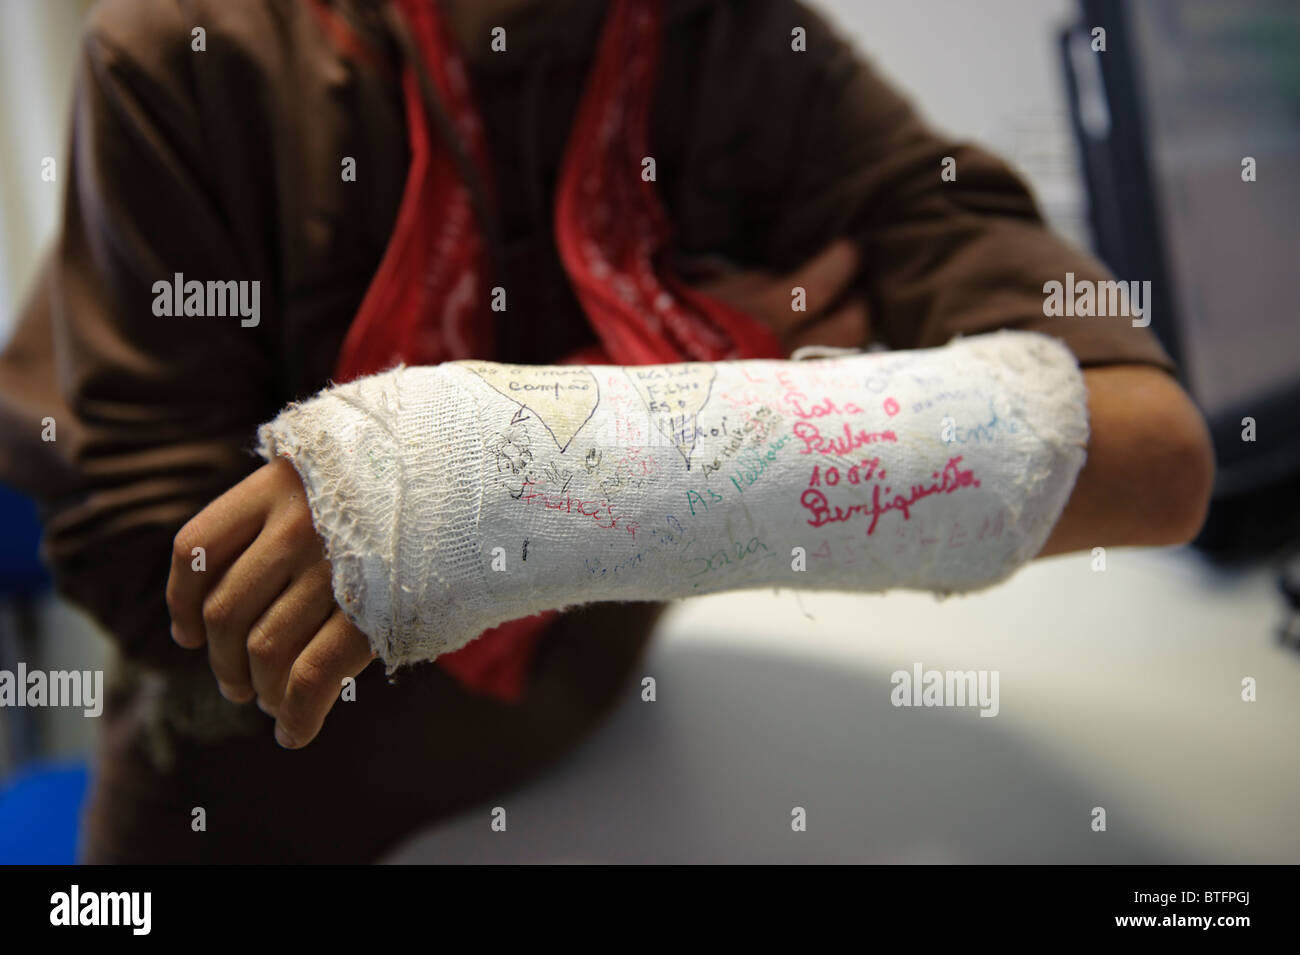 Broken arm in a cast covered with signatures Stock Photo